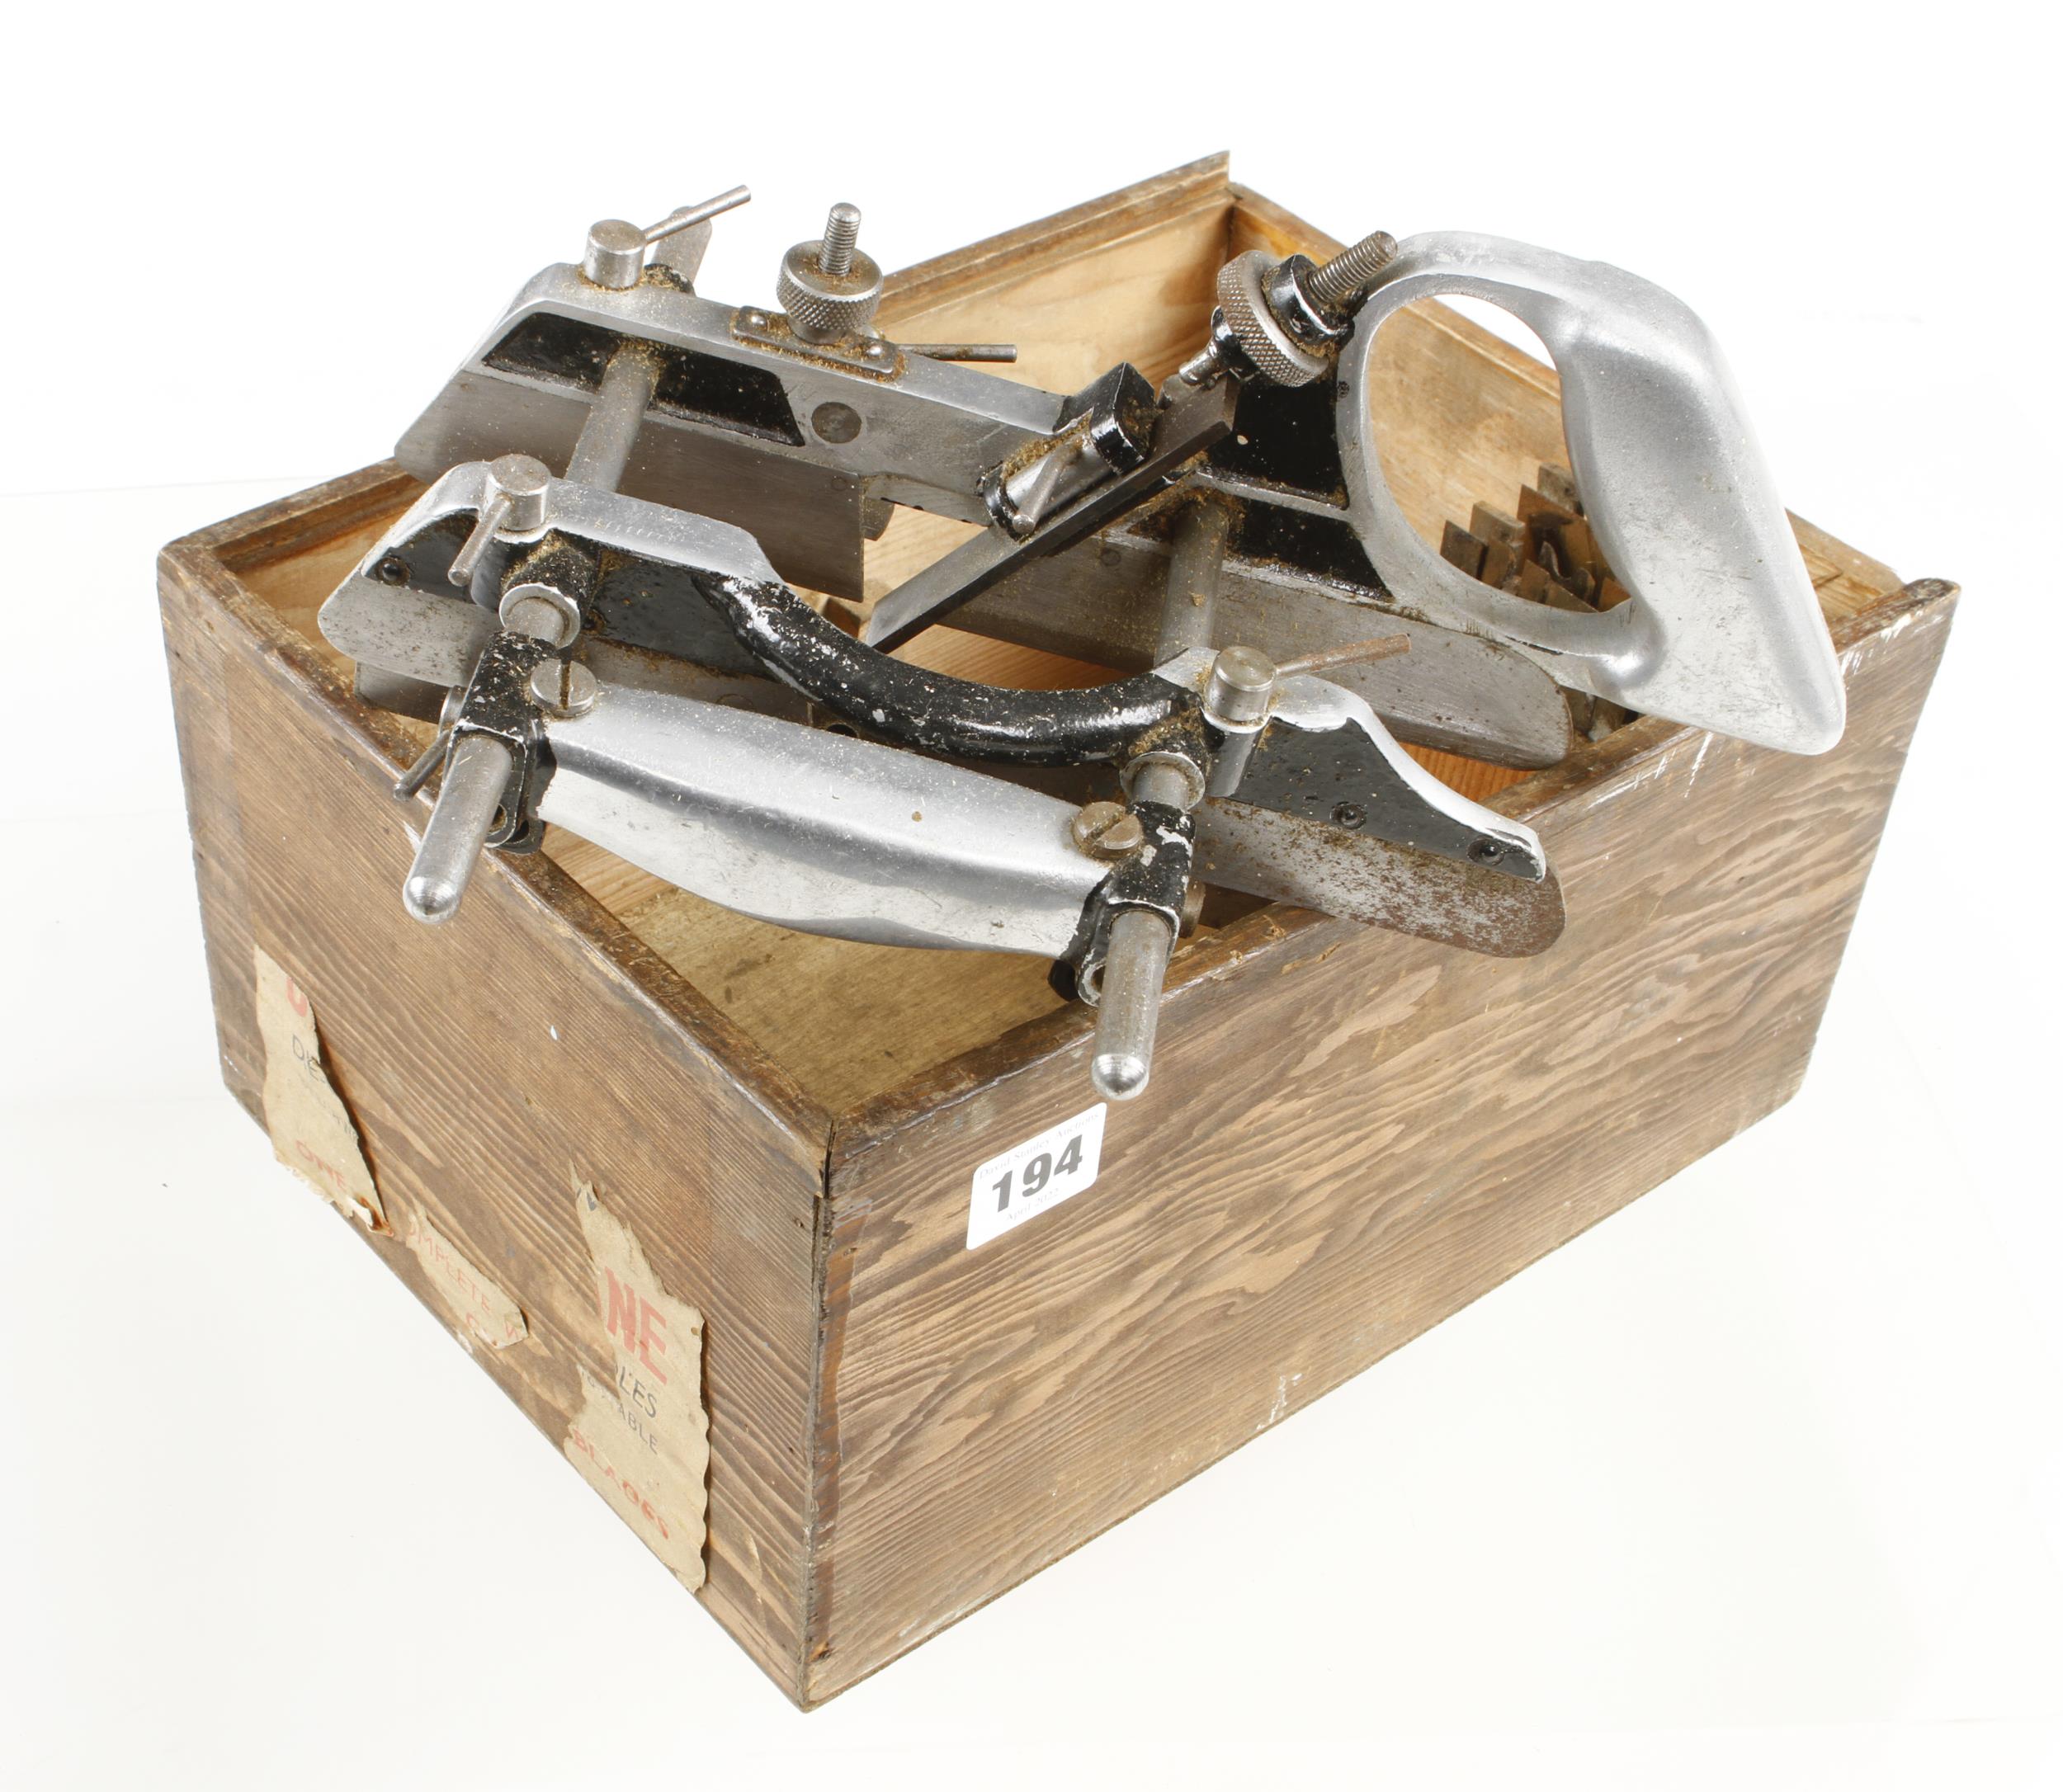 A LEWIN plough with cutters in orig box (lacks lid) G+